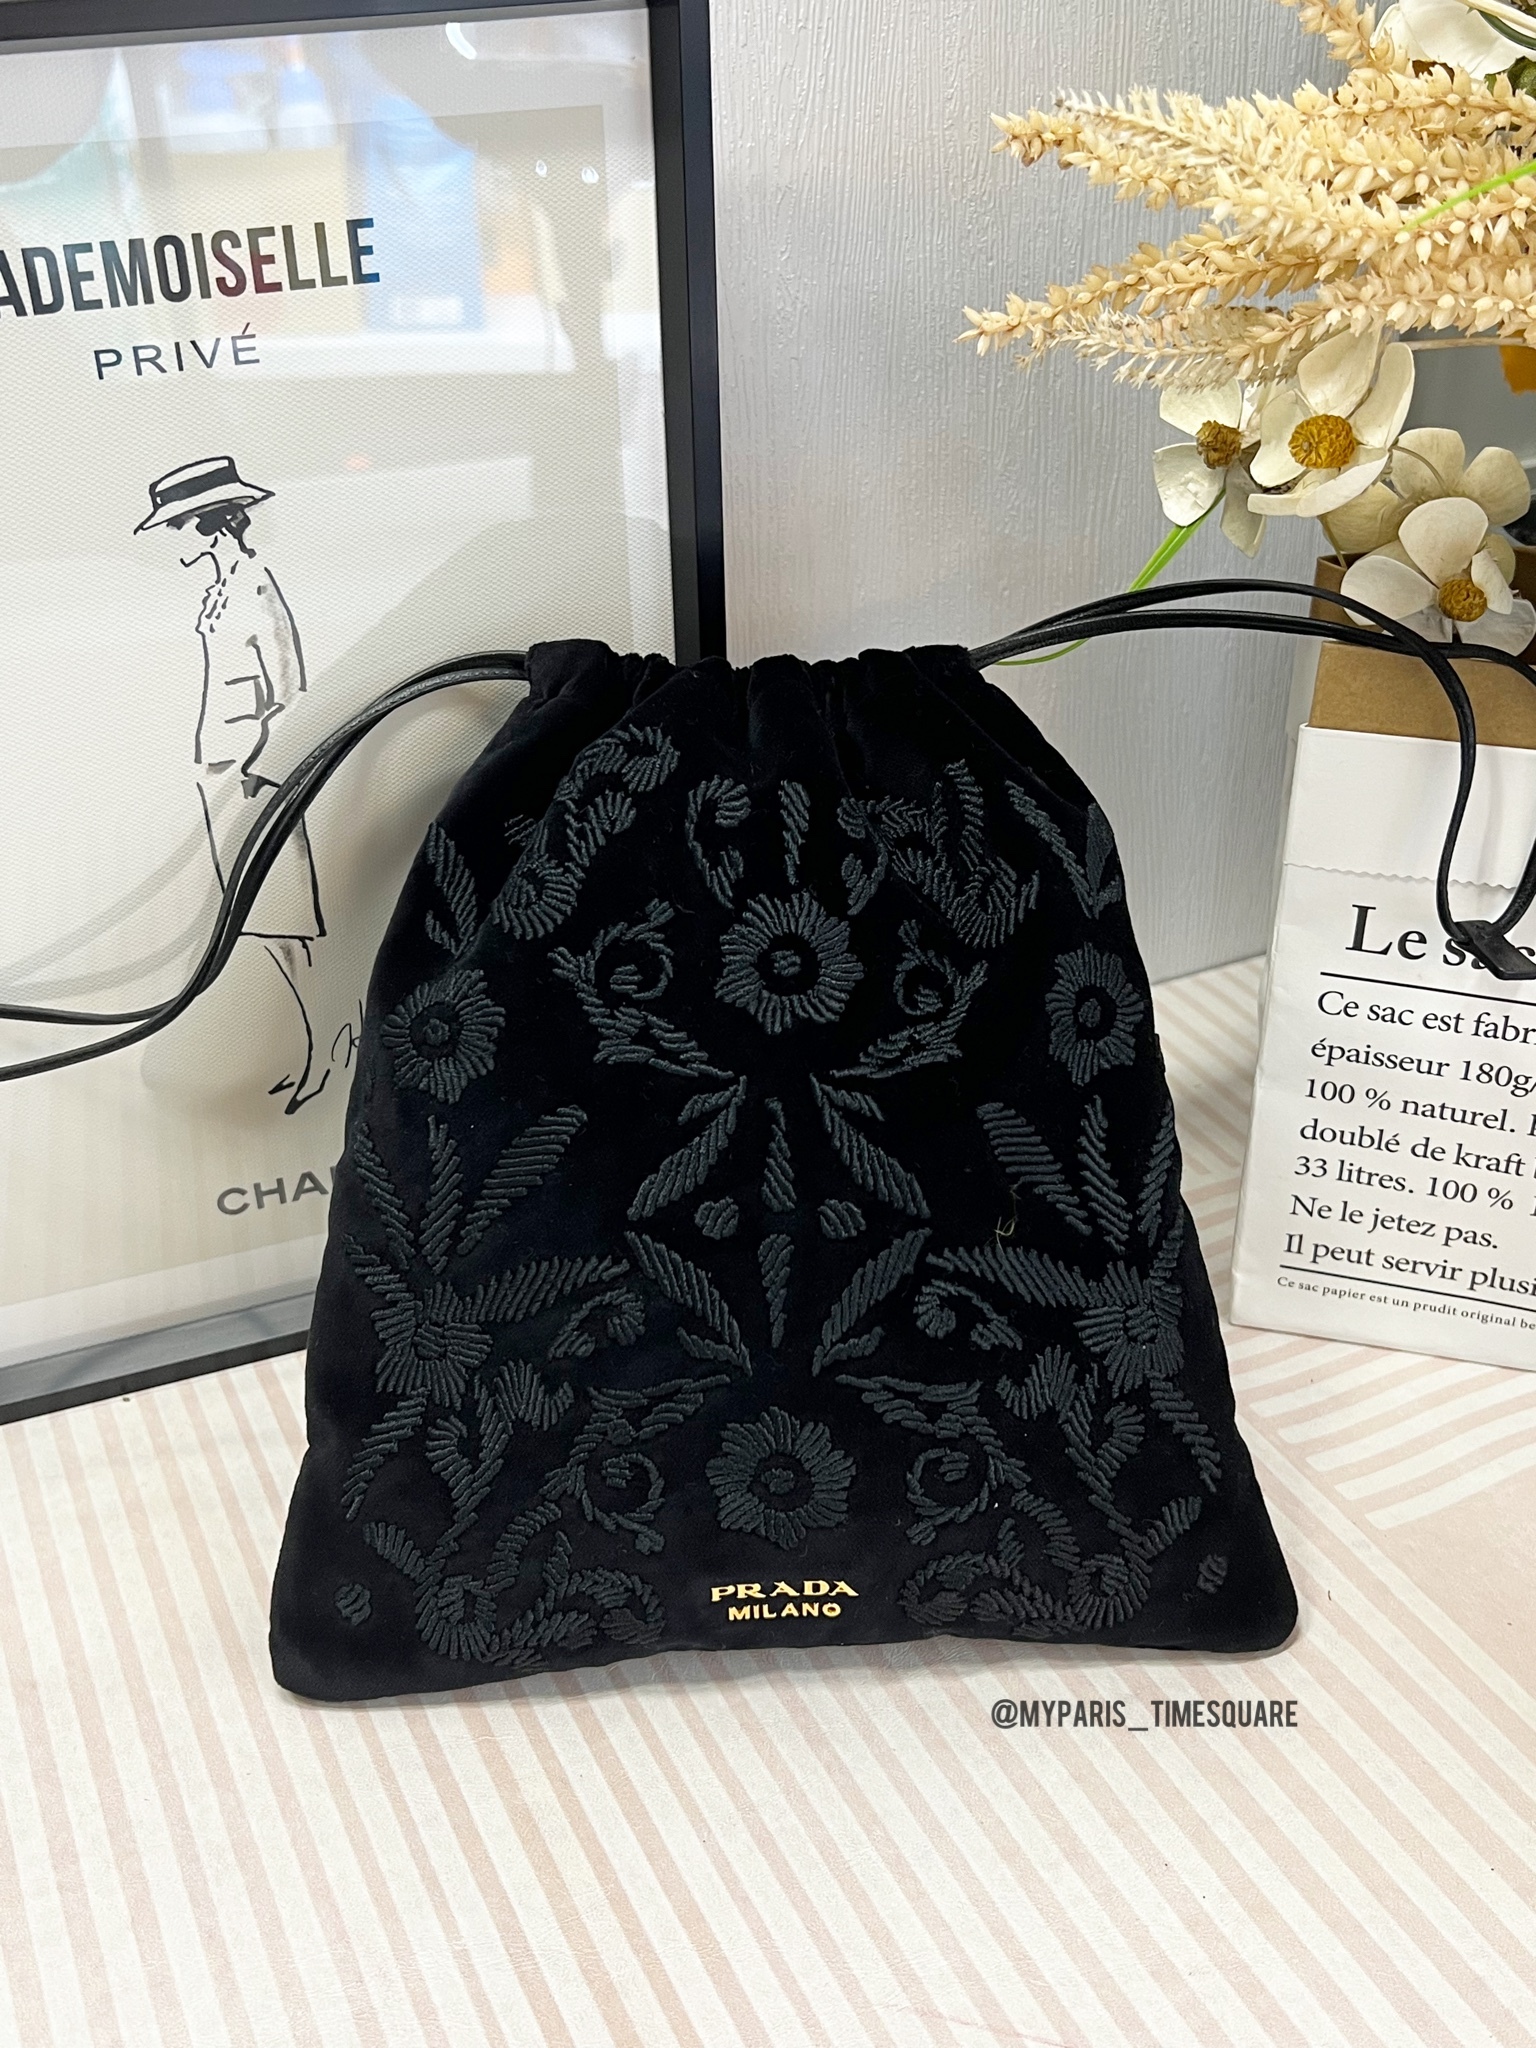 Prada Black Embroidered Velvet Pouch – My Paris Branded Station-Sell Your  Bags And Get Instant Cash